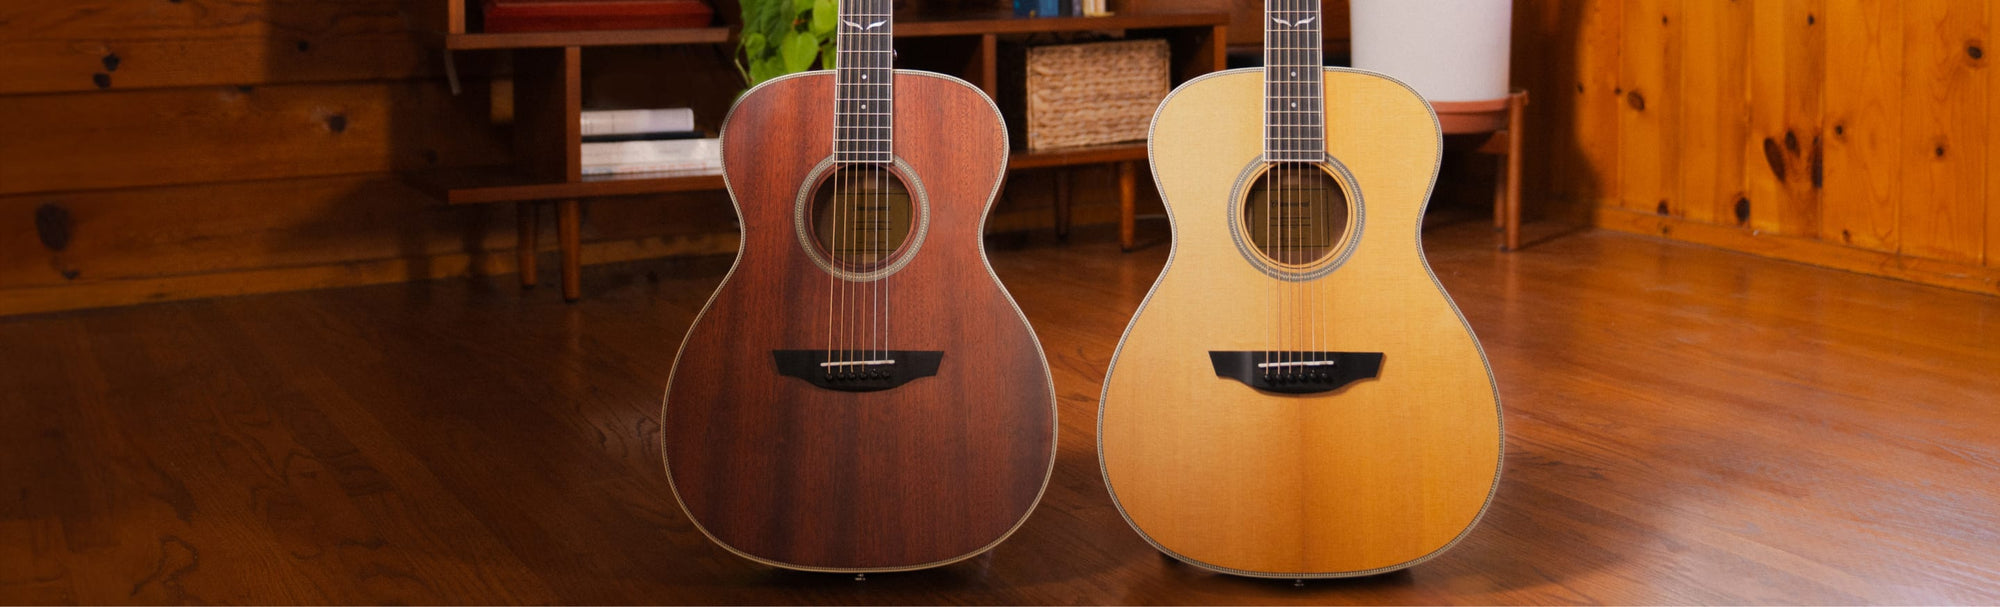 The Hudson Torrefied Spruce, Ava Torrefied Spruce, and Sage Torrefied Spruce guitars.